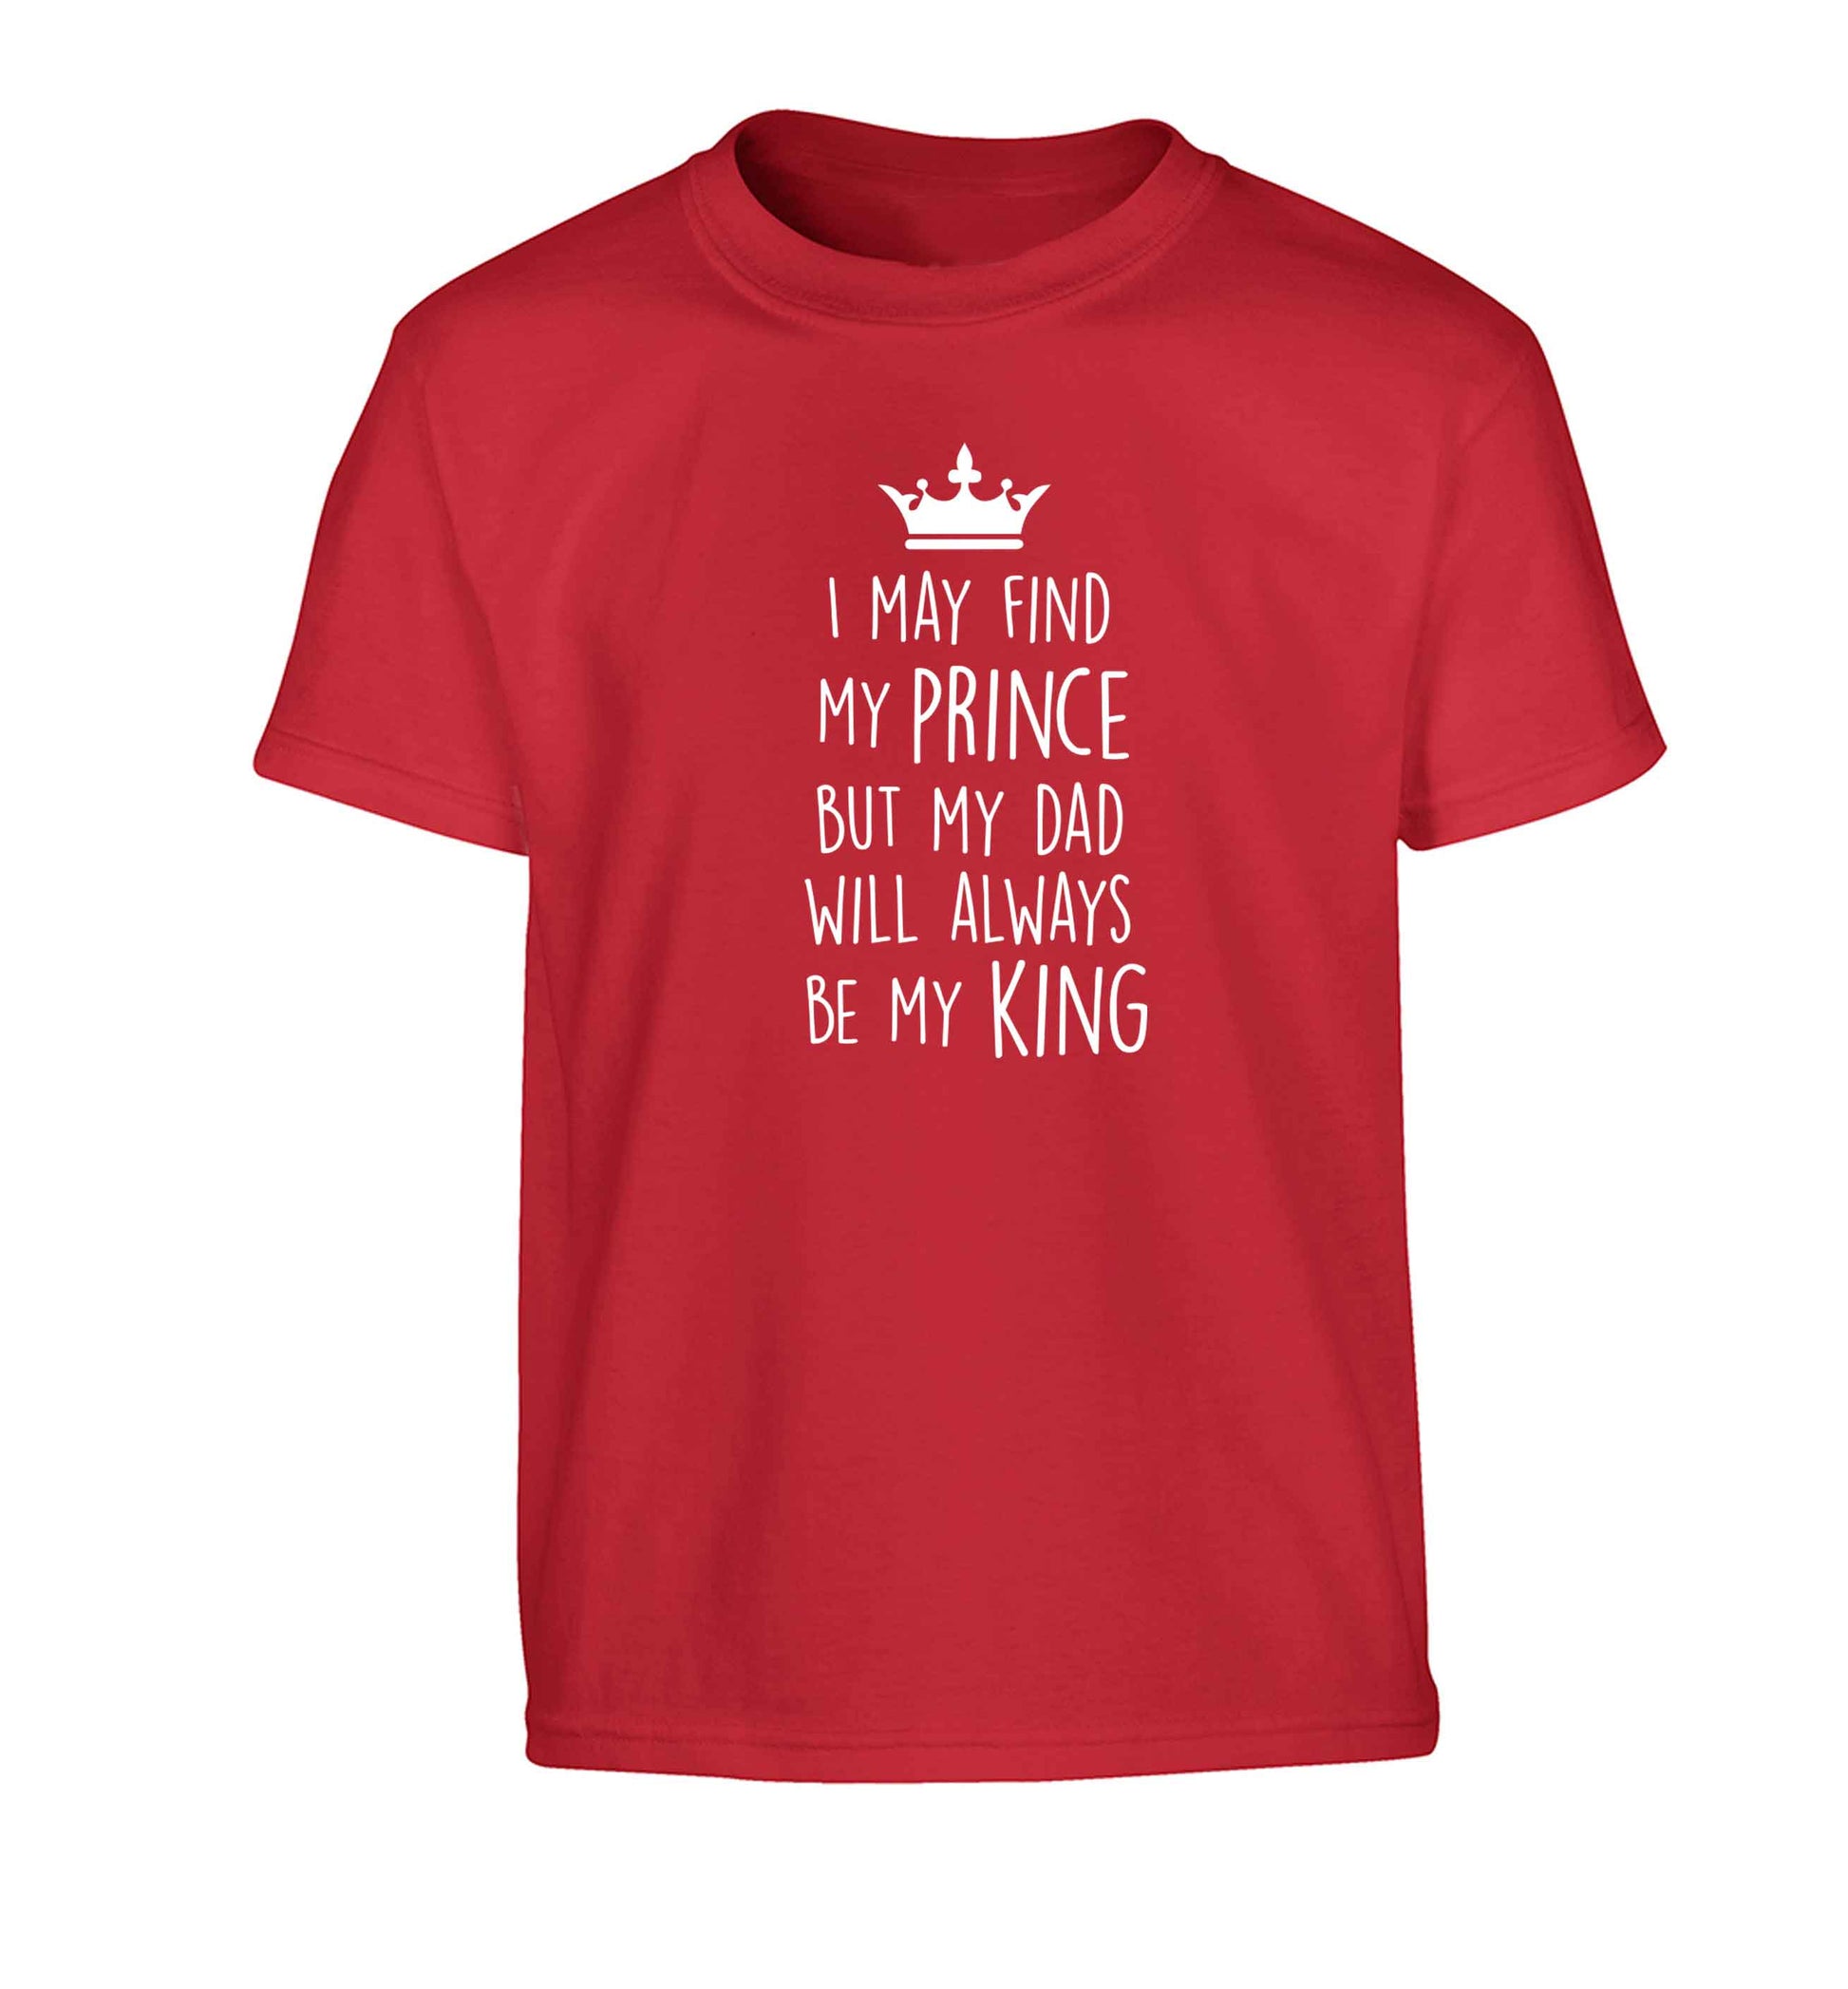 I may find my prince but my dad will always be my king Children's red Tshirt 12-13 Years